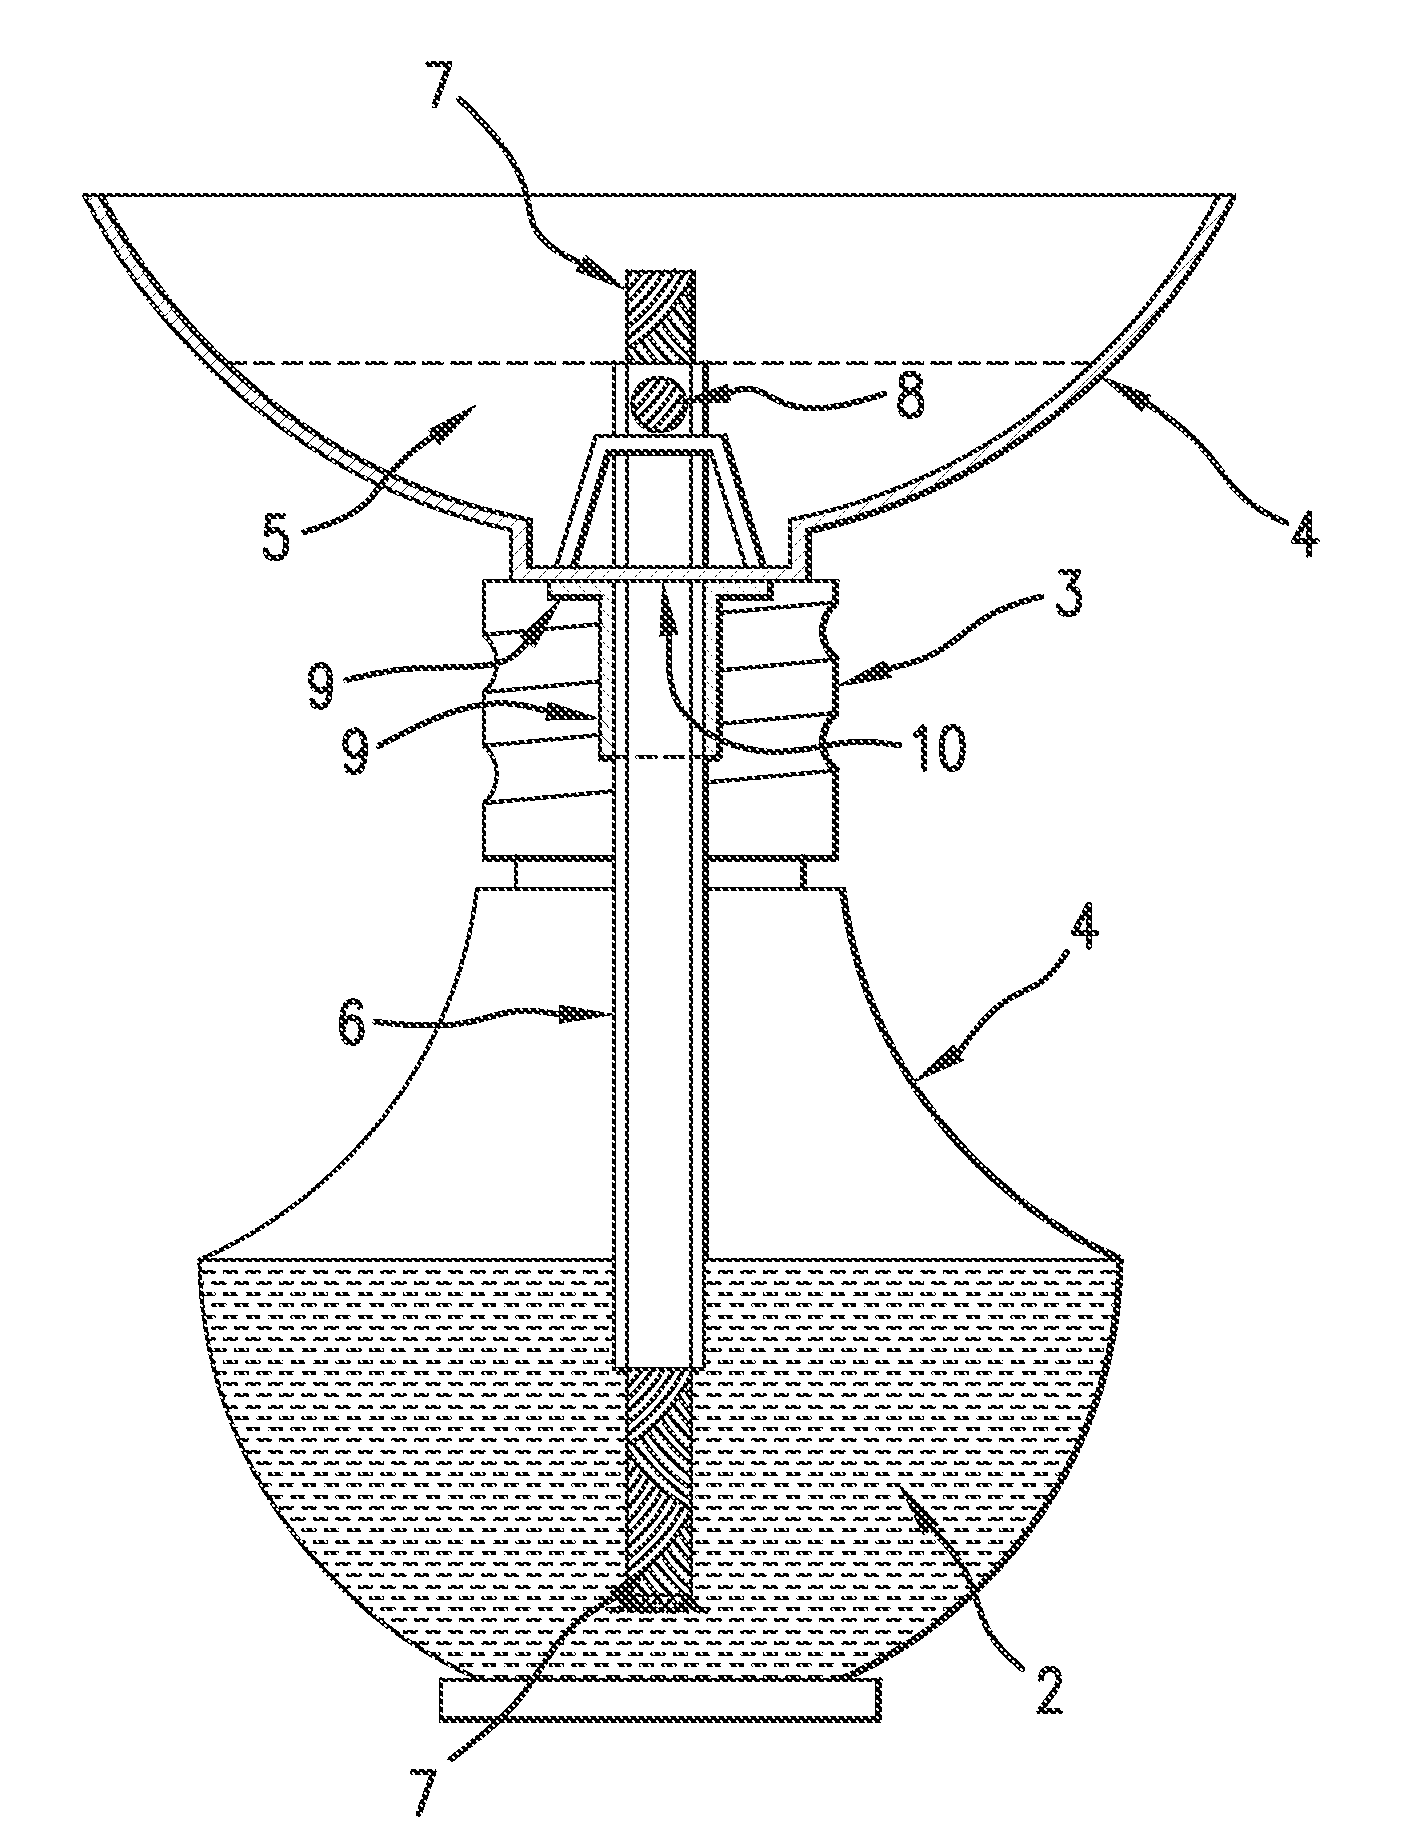 Oil lamp with heat conductive element